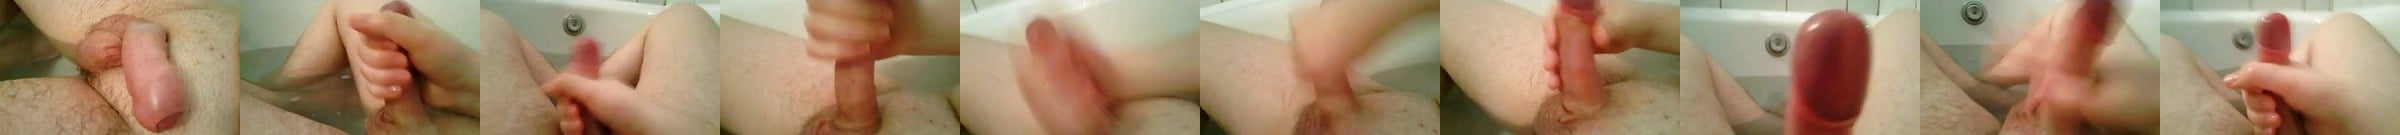 Jerking Off My Small Dick In The Car Gay Porn 6d XHamster XHamster